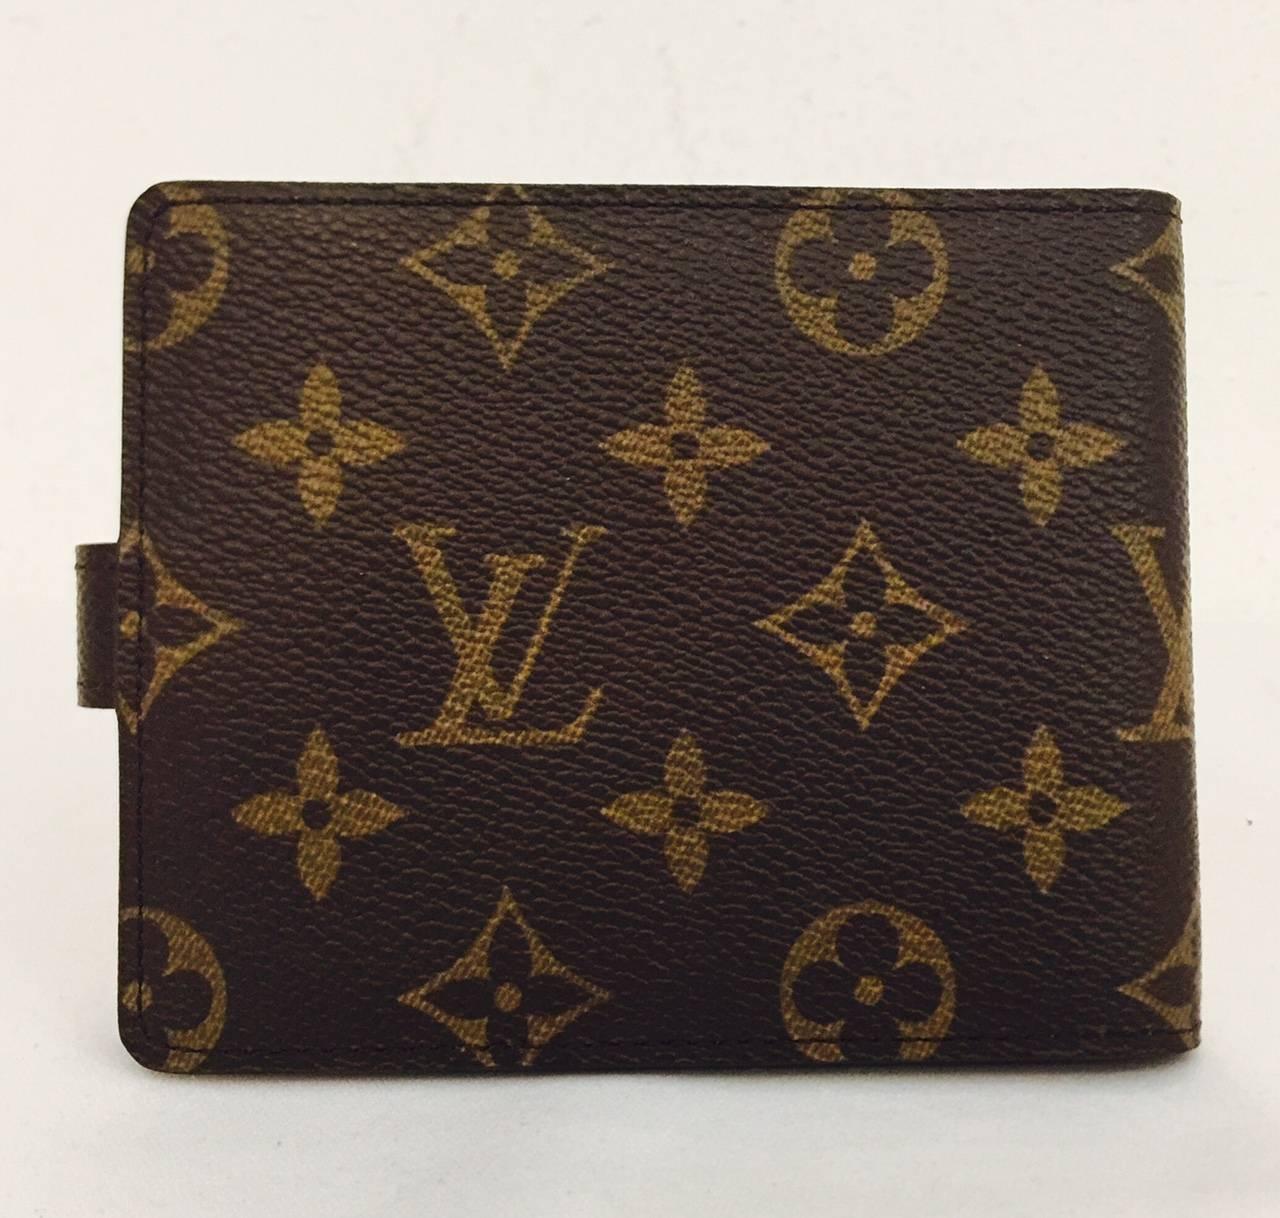 Limited Edition Men's Vogue and Louis Vuitton wallet is highly collectible and truly worthy of Vogue and Vuitton's archives!  Crafted specifically as part of MoMa's Film Benefit (2008) this wallet features Vuitton's iconic monogram canvas and